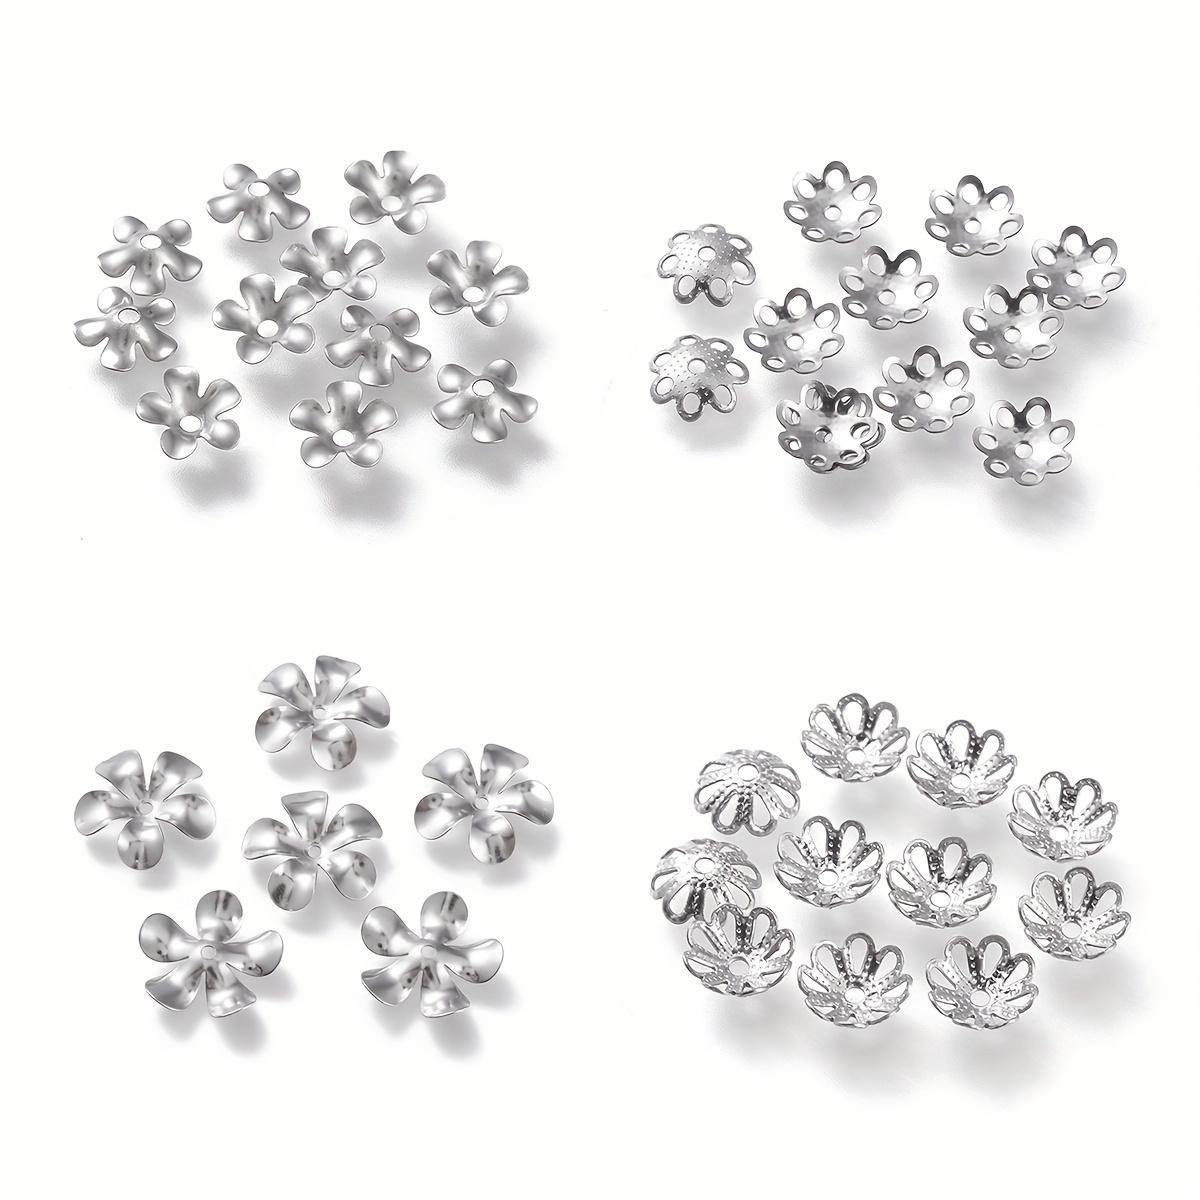 20Pcs 7mm Stainless Steel Flower Beads Cap Golden / Silvery Small Square  End Bead Caps Spacer Bead Caps Bulk For DIY Jewelry Making Accessories